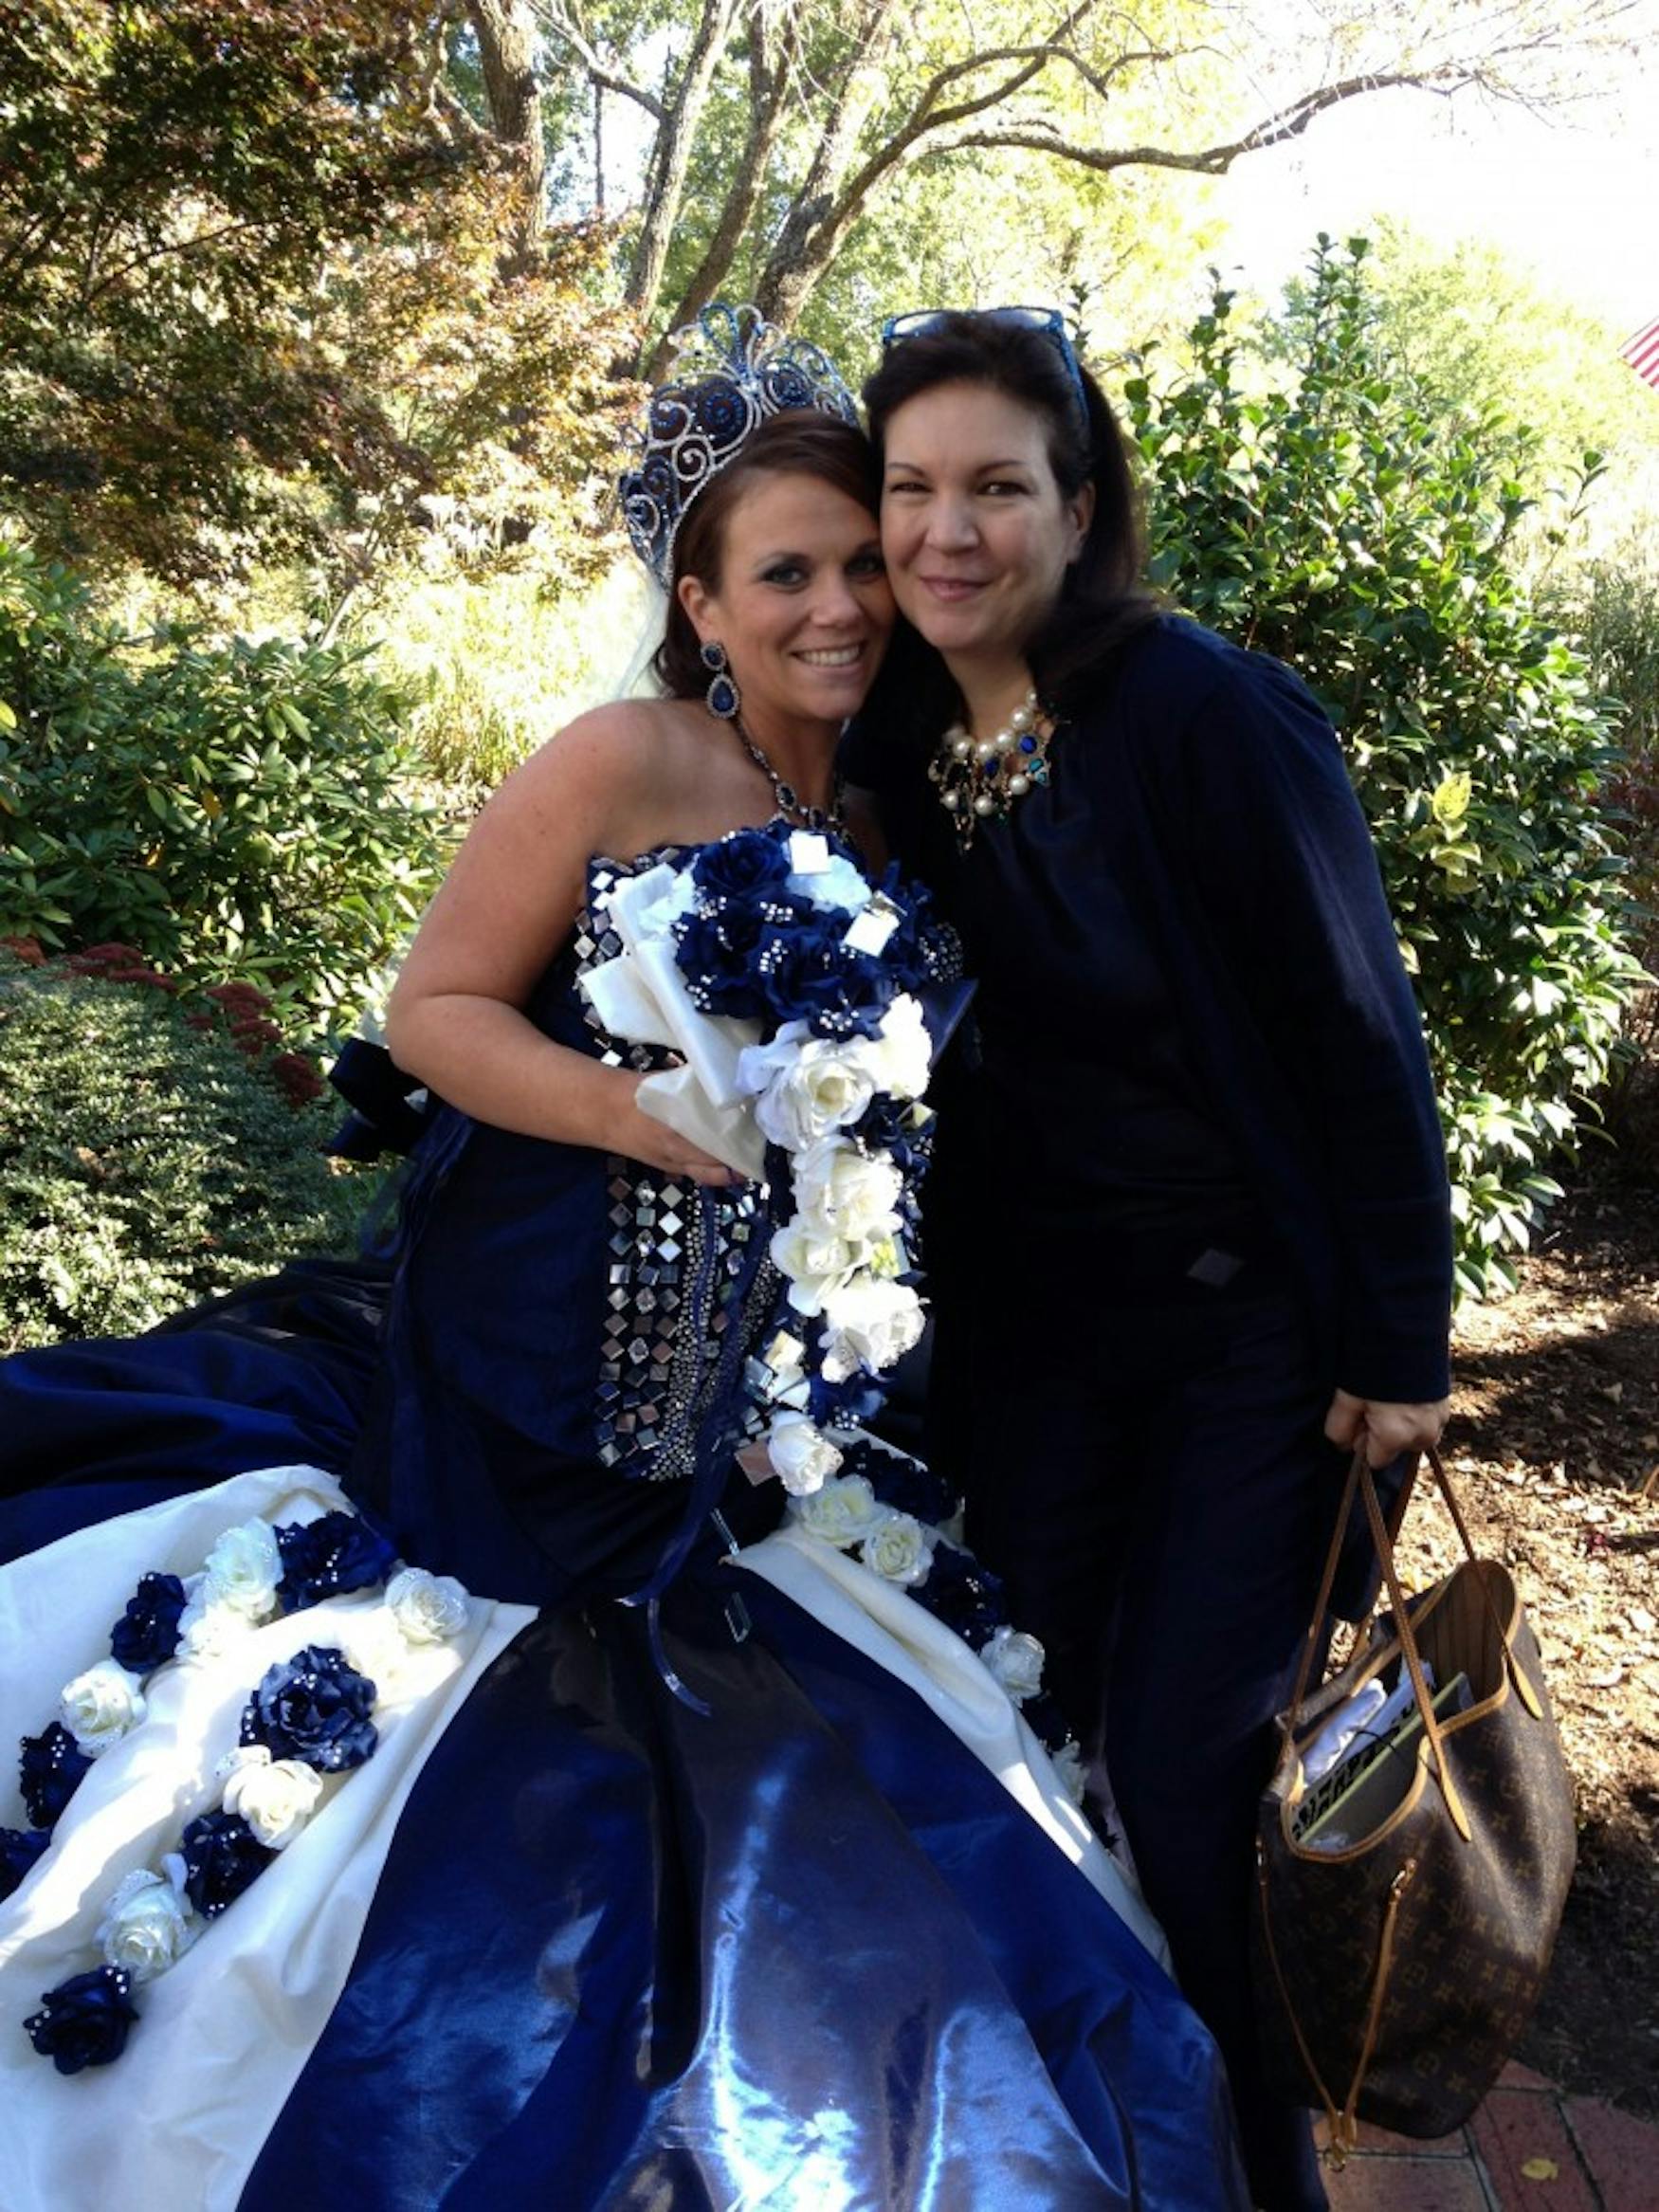 BRIDE IN BLUE: Celli (right) poses with a bride dressed in one of her colorful wedding gowns.